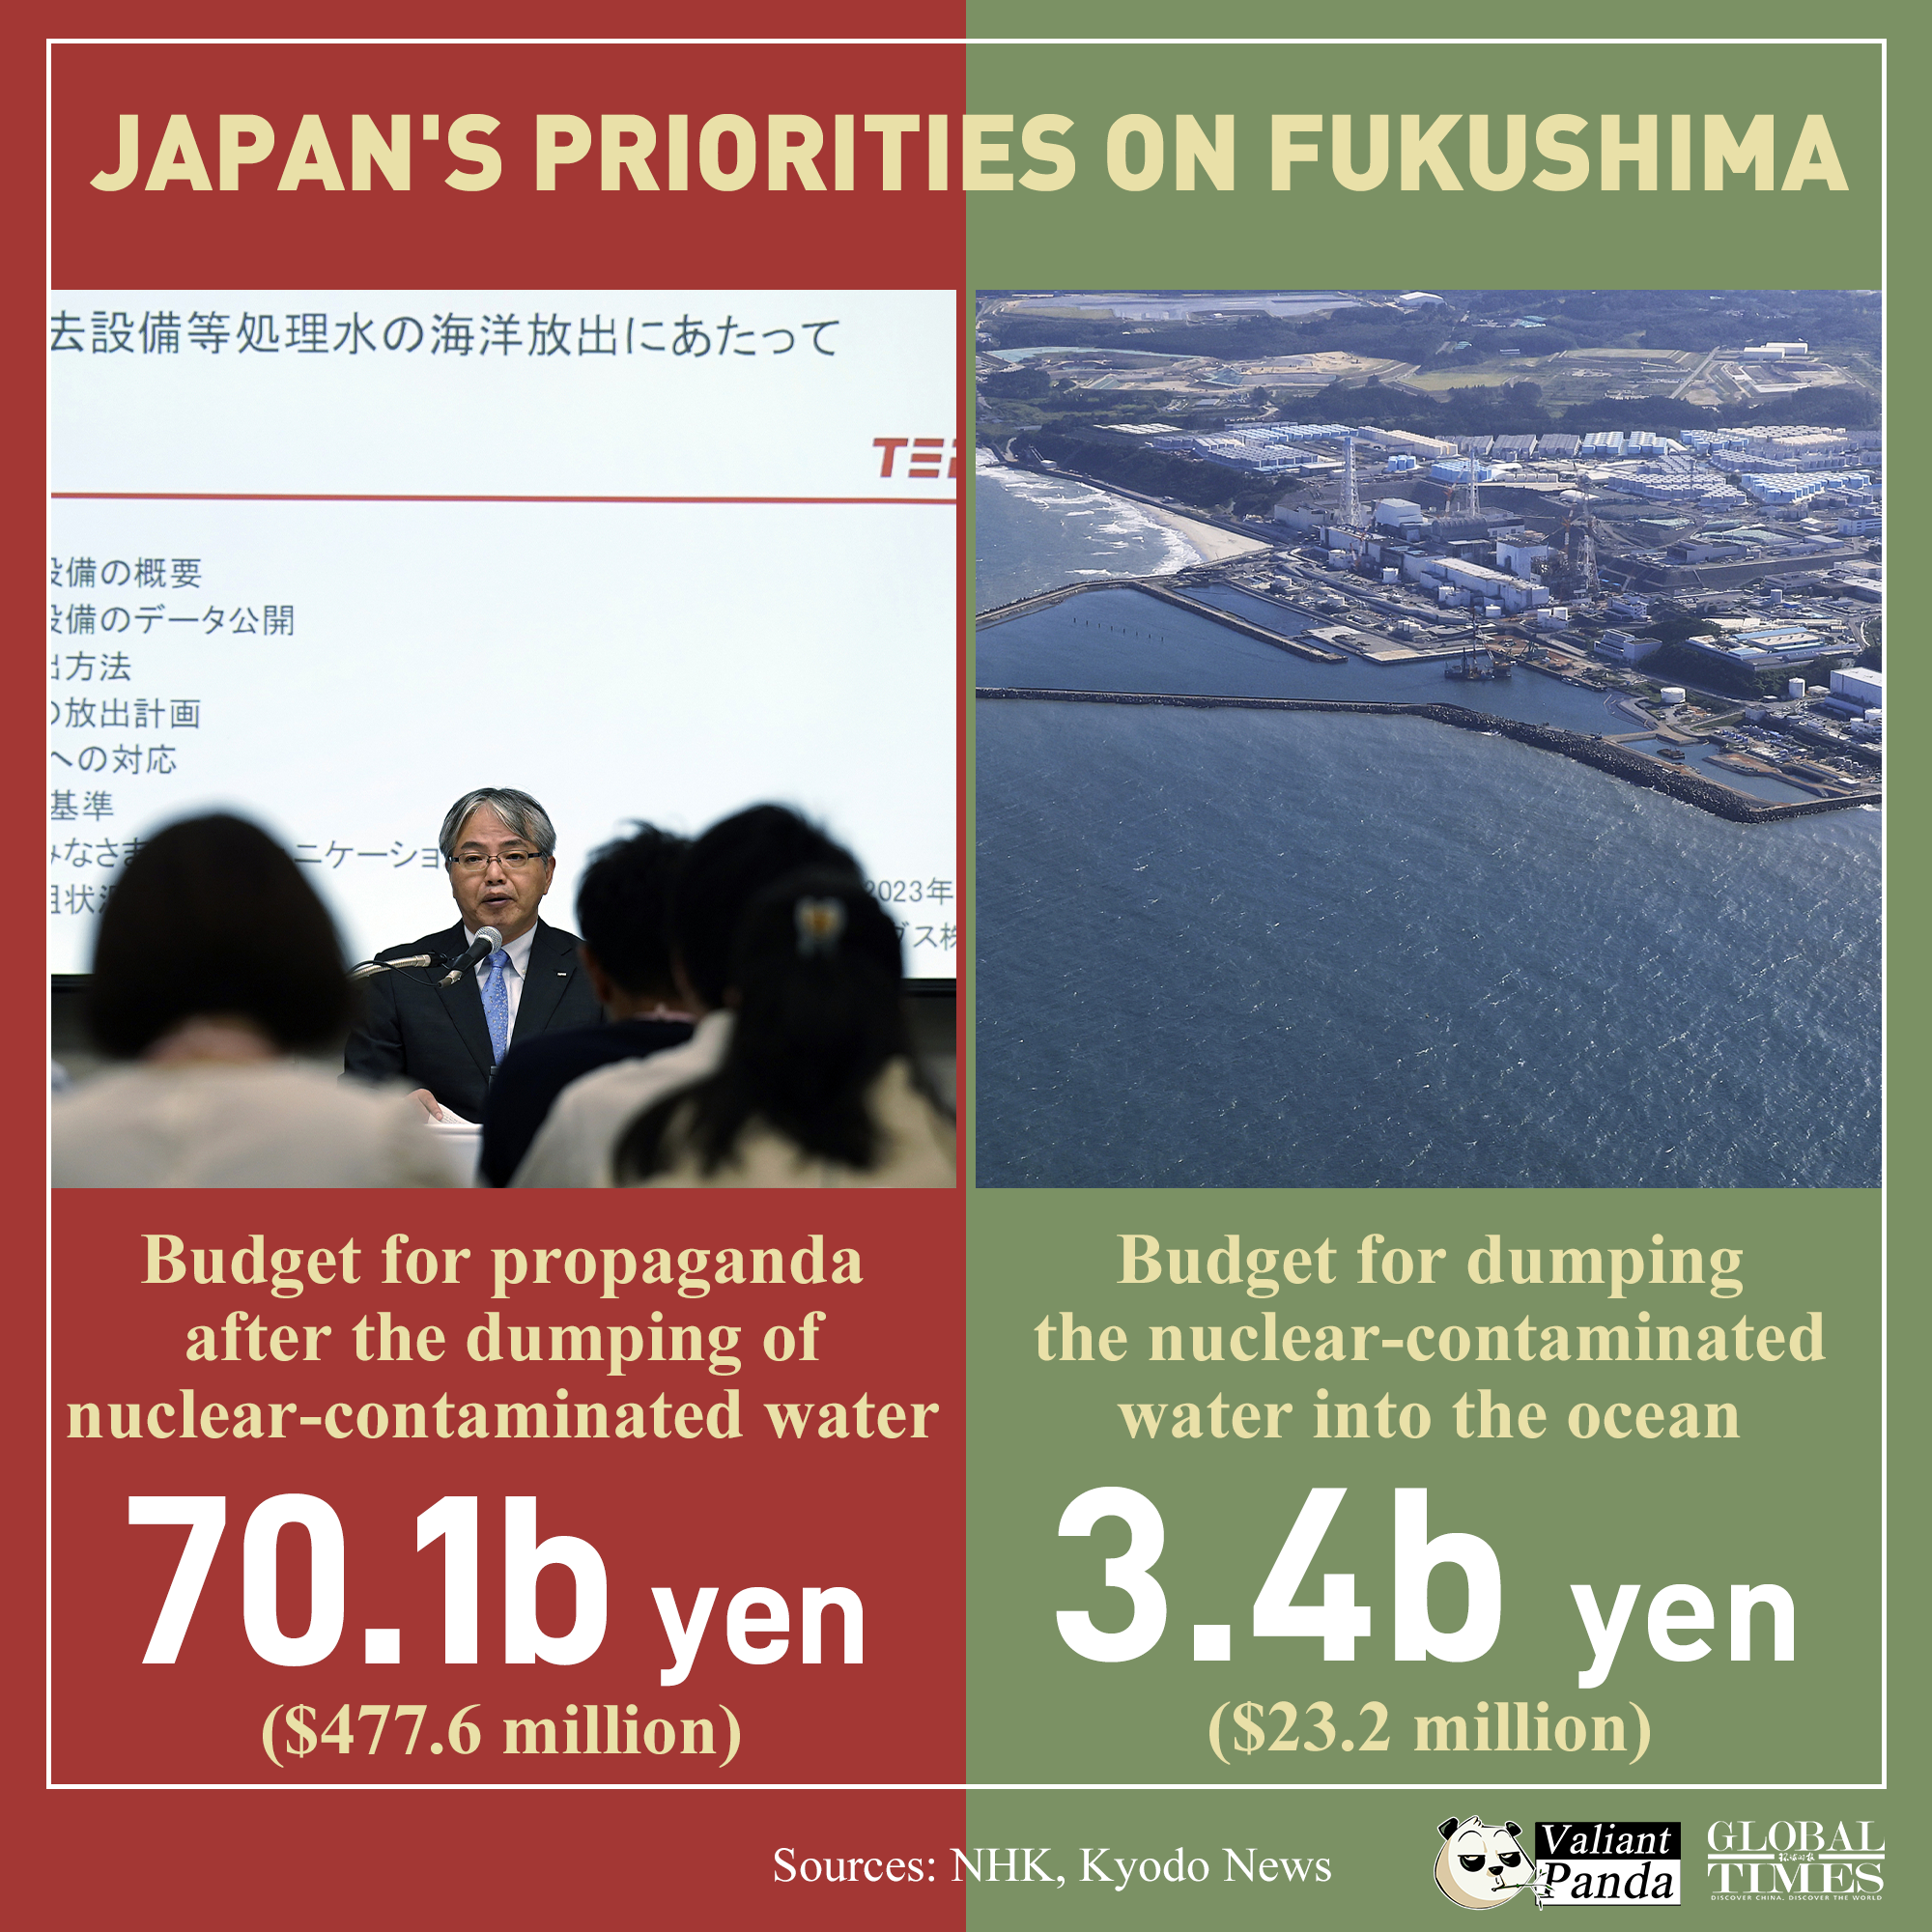 Japan is willing to spend 70 billion yen on propaganda, but unwilling to explore better methods for disposing of nuclear-contaminated water. Graphic:GT